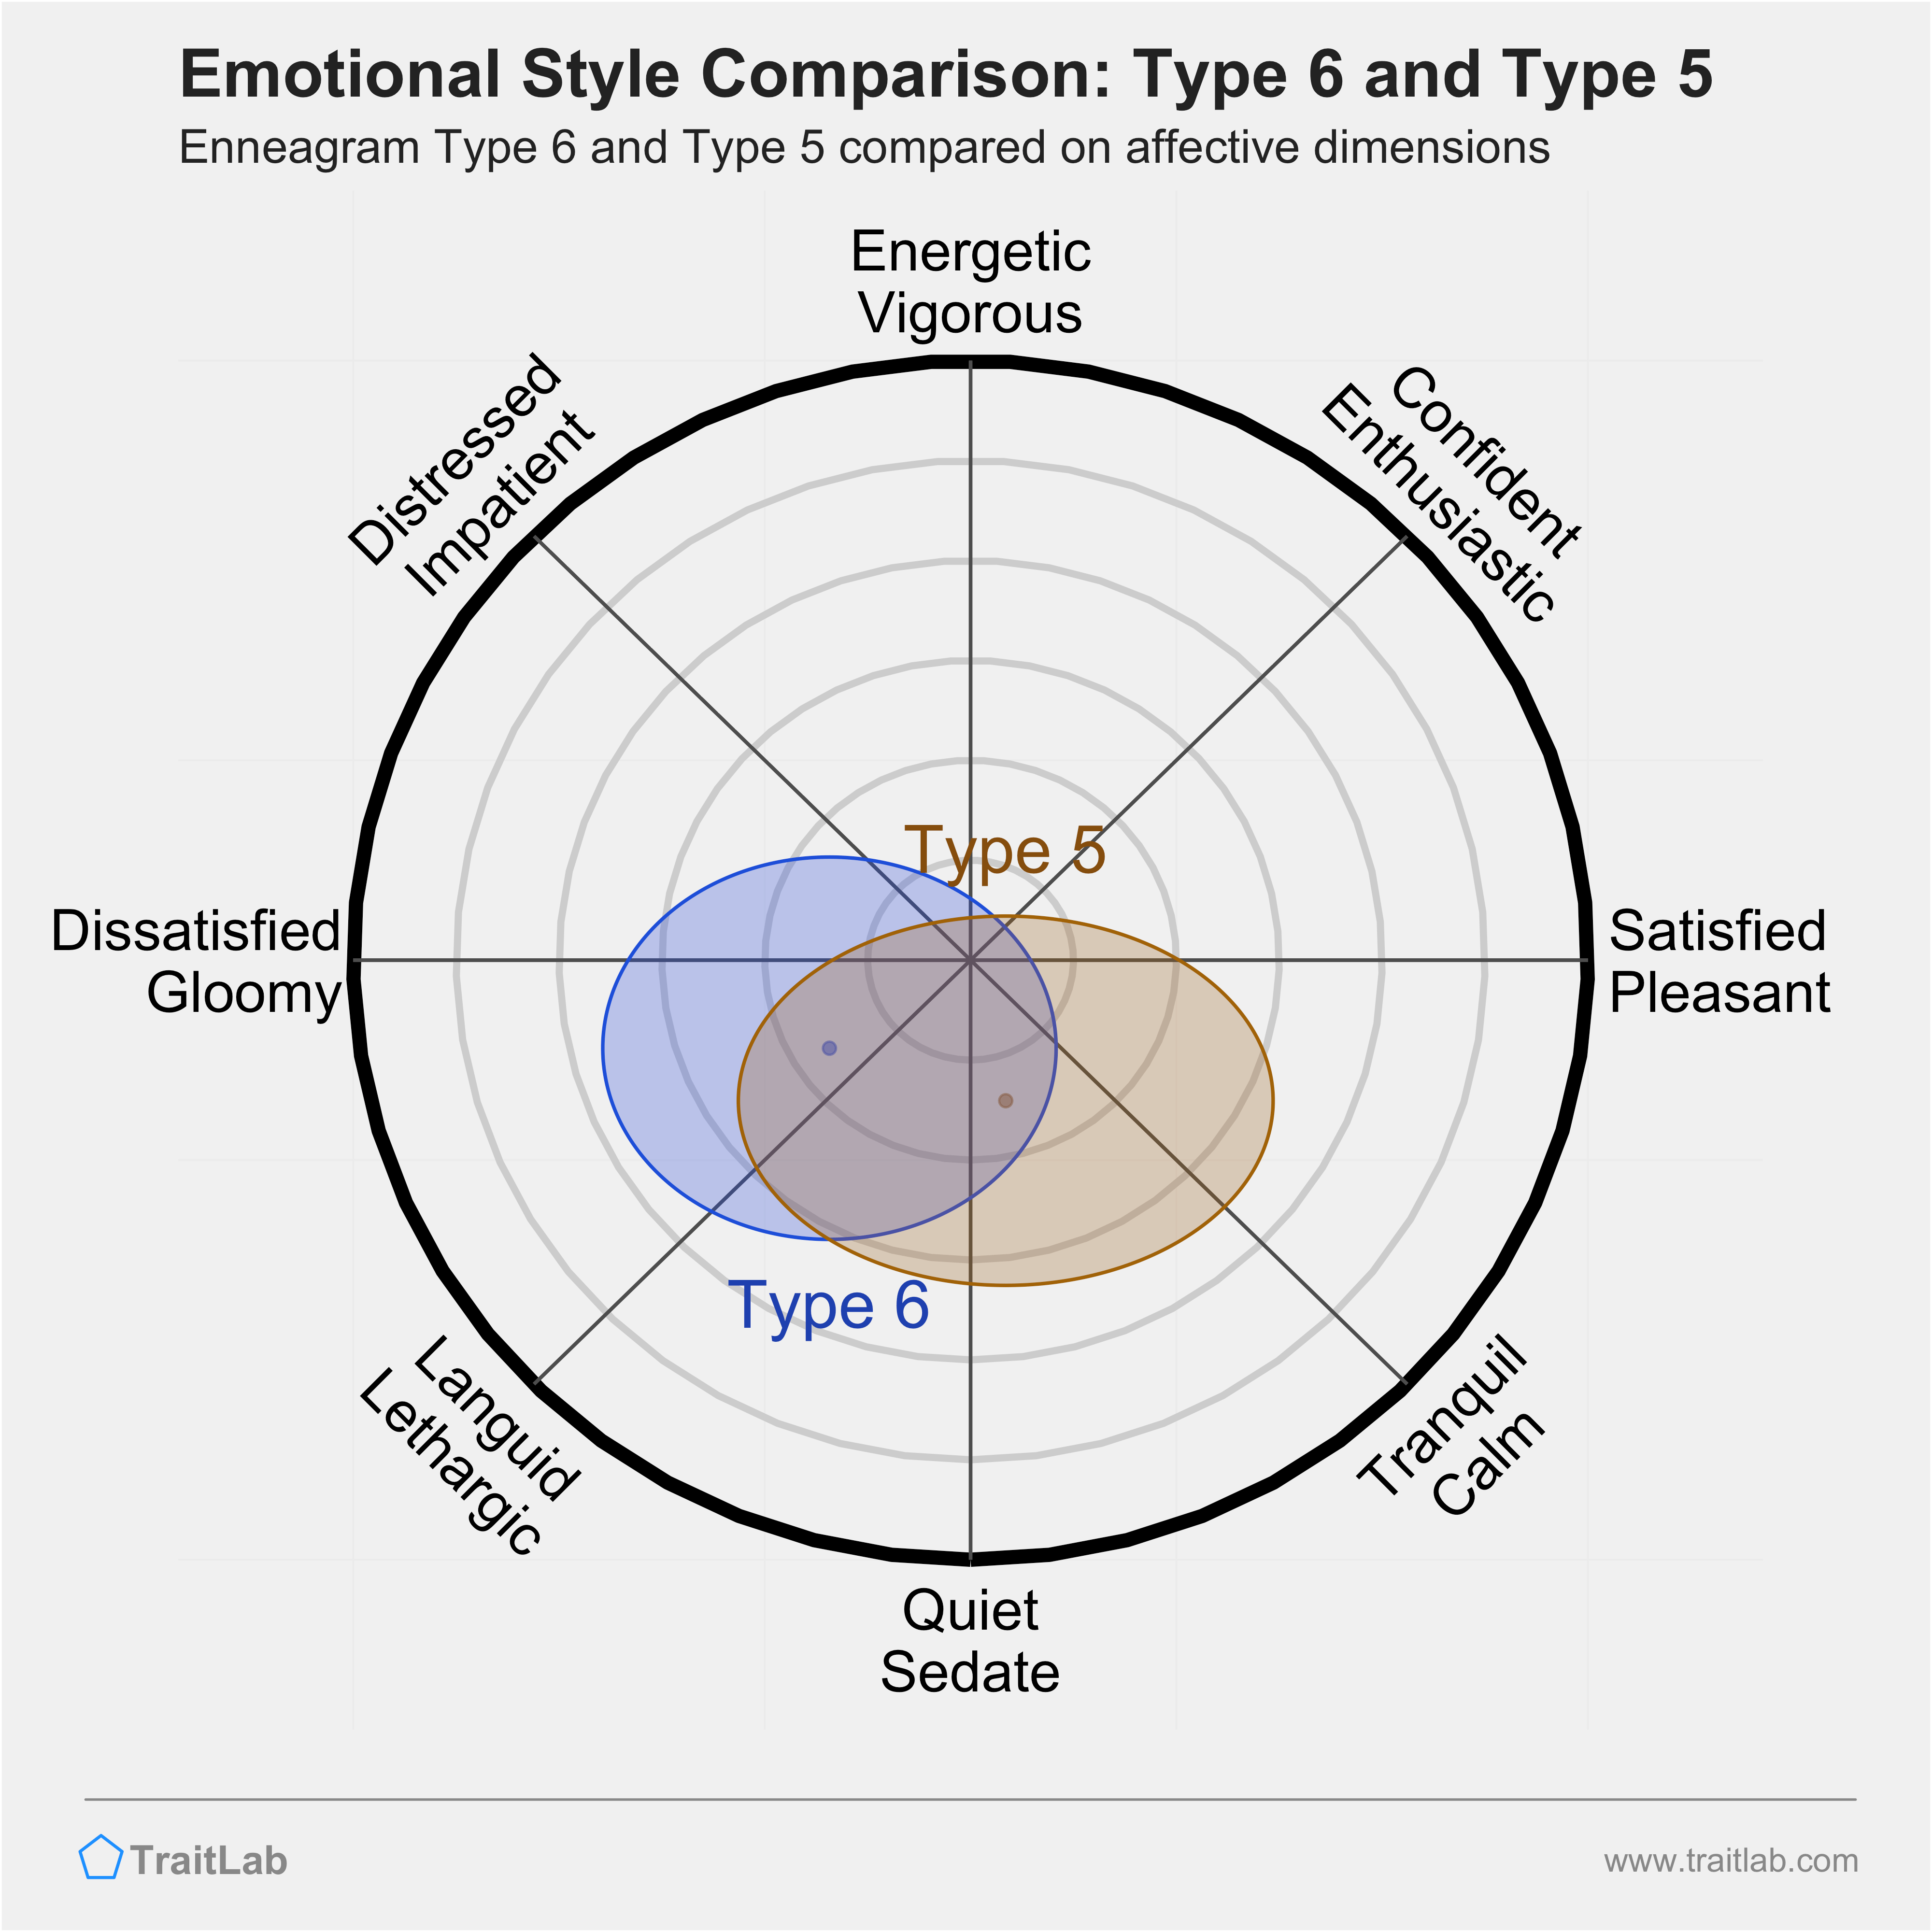 Type 6 and Type 5 comparison across emotional (affective) dimensions